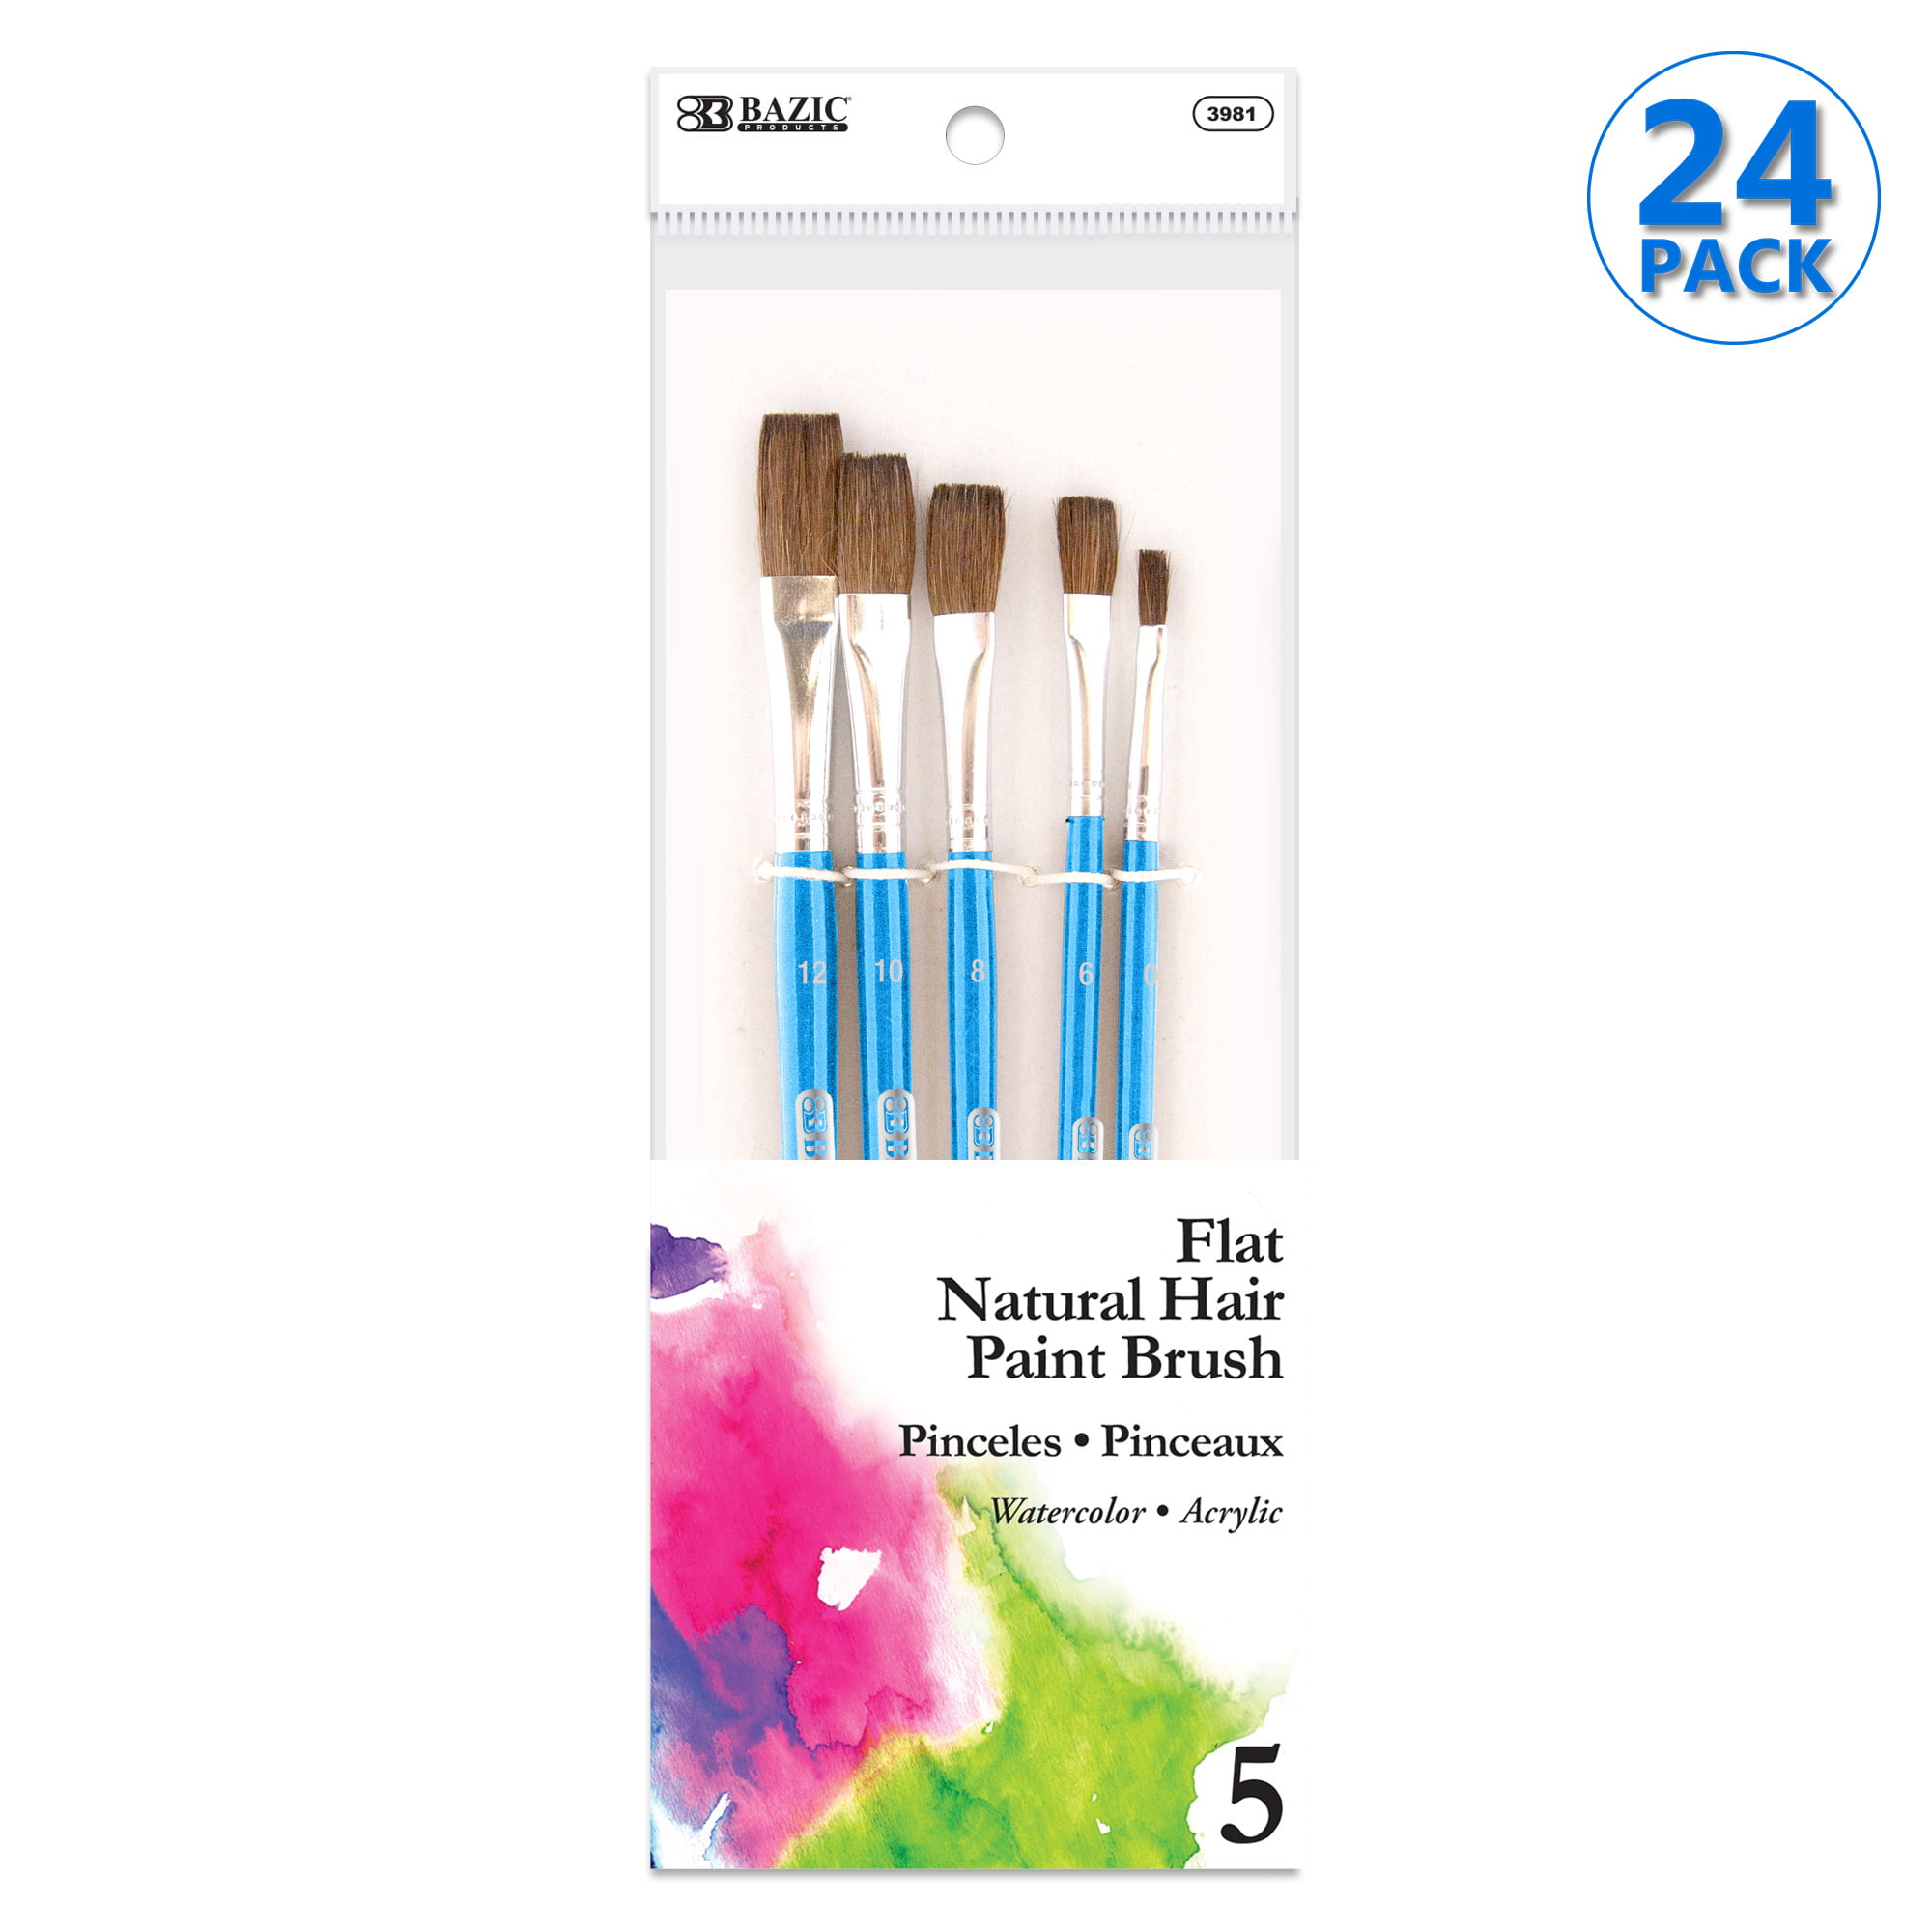 The Army Painter Wargamer: 3pcs Small Drybrush - Hobby Miniature Model  Paint Brush Set with Synthetic Toray Hair - Model Brushes, Miniature Paint  Brushes for Miniature Painting 